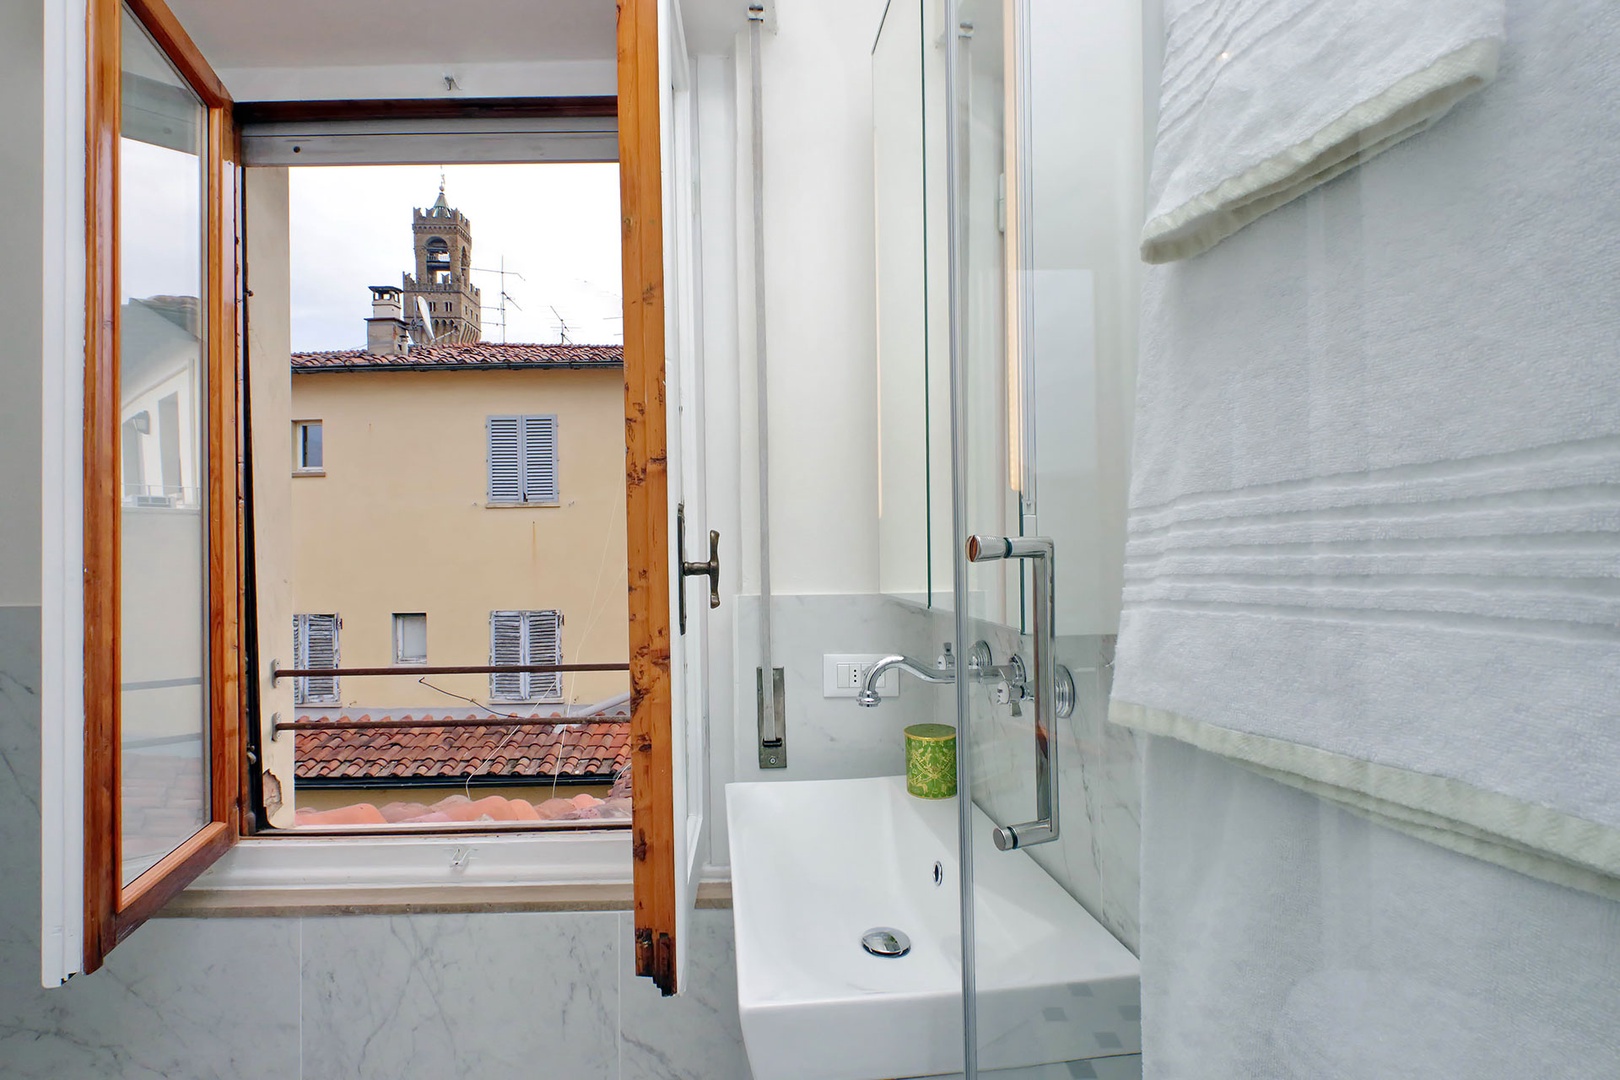 Enjoy views of the Piazza della Signoria belltower from the bathroom as well.